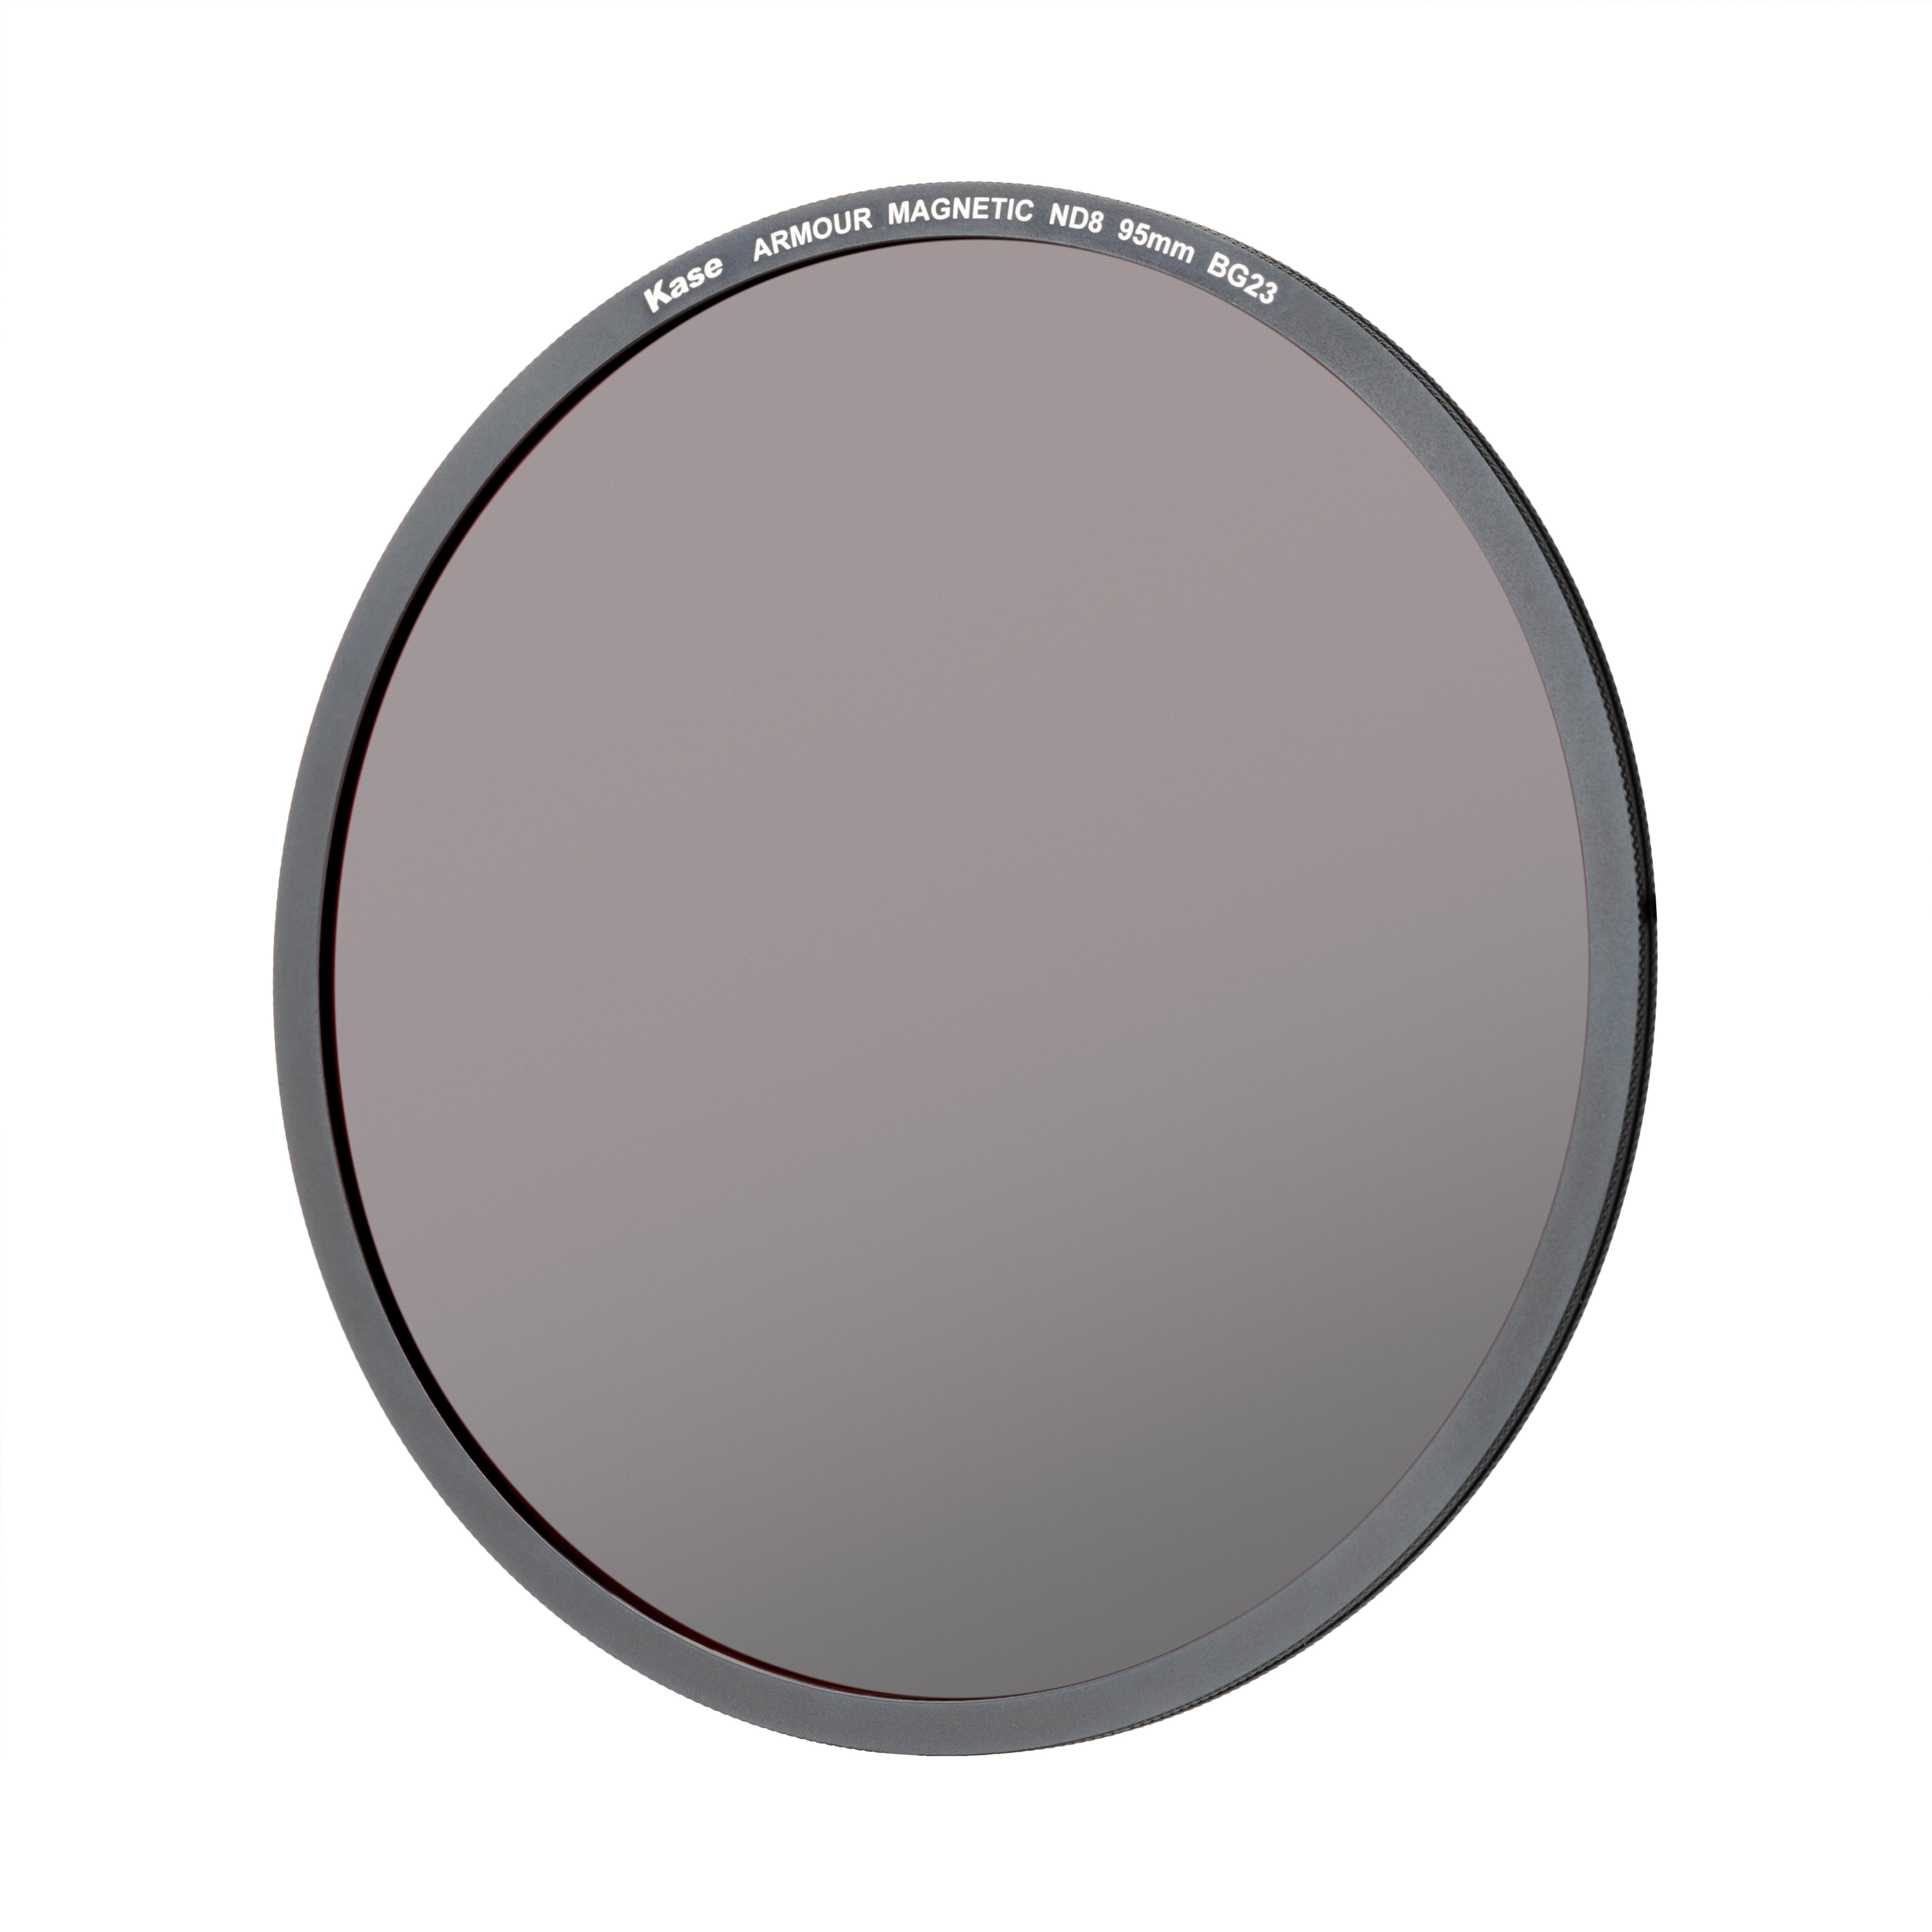 Armour 95mm Magnetic ND Filter